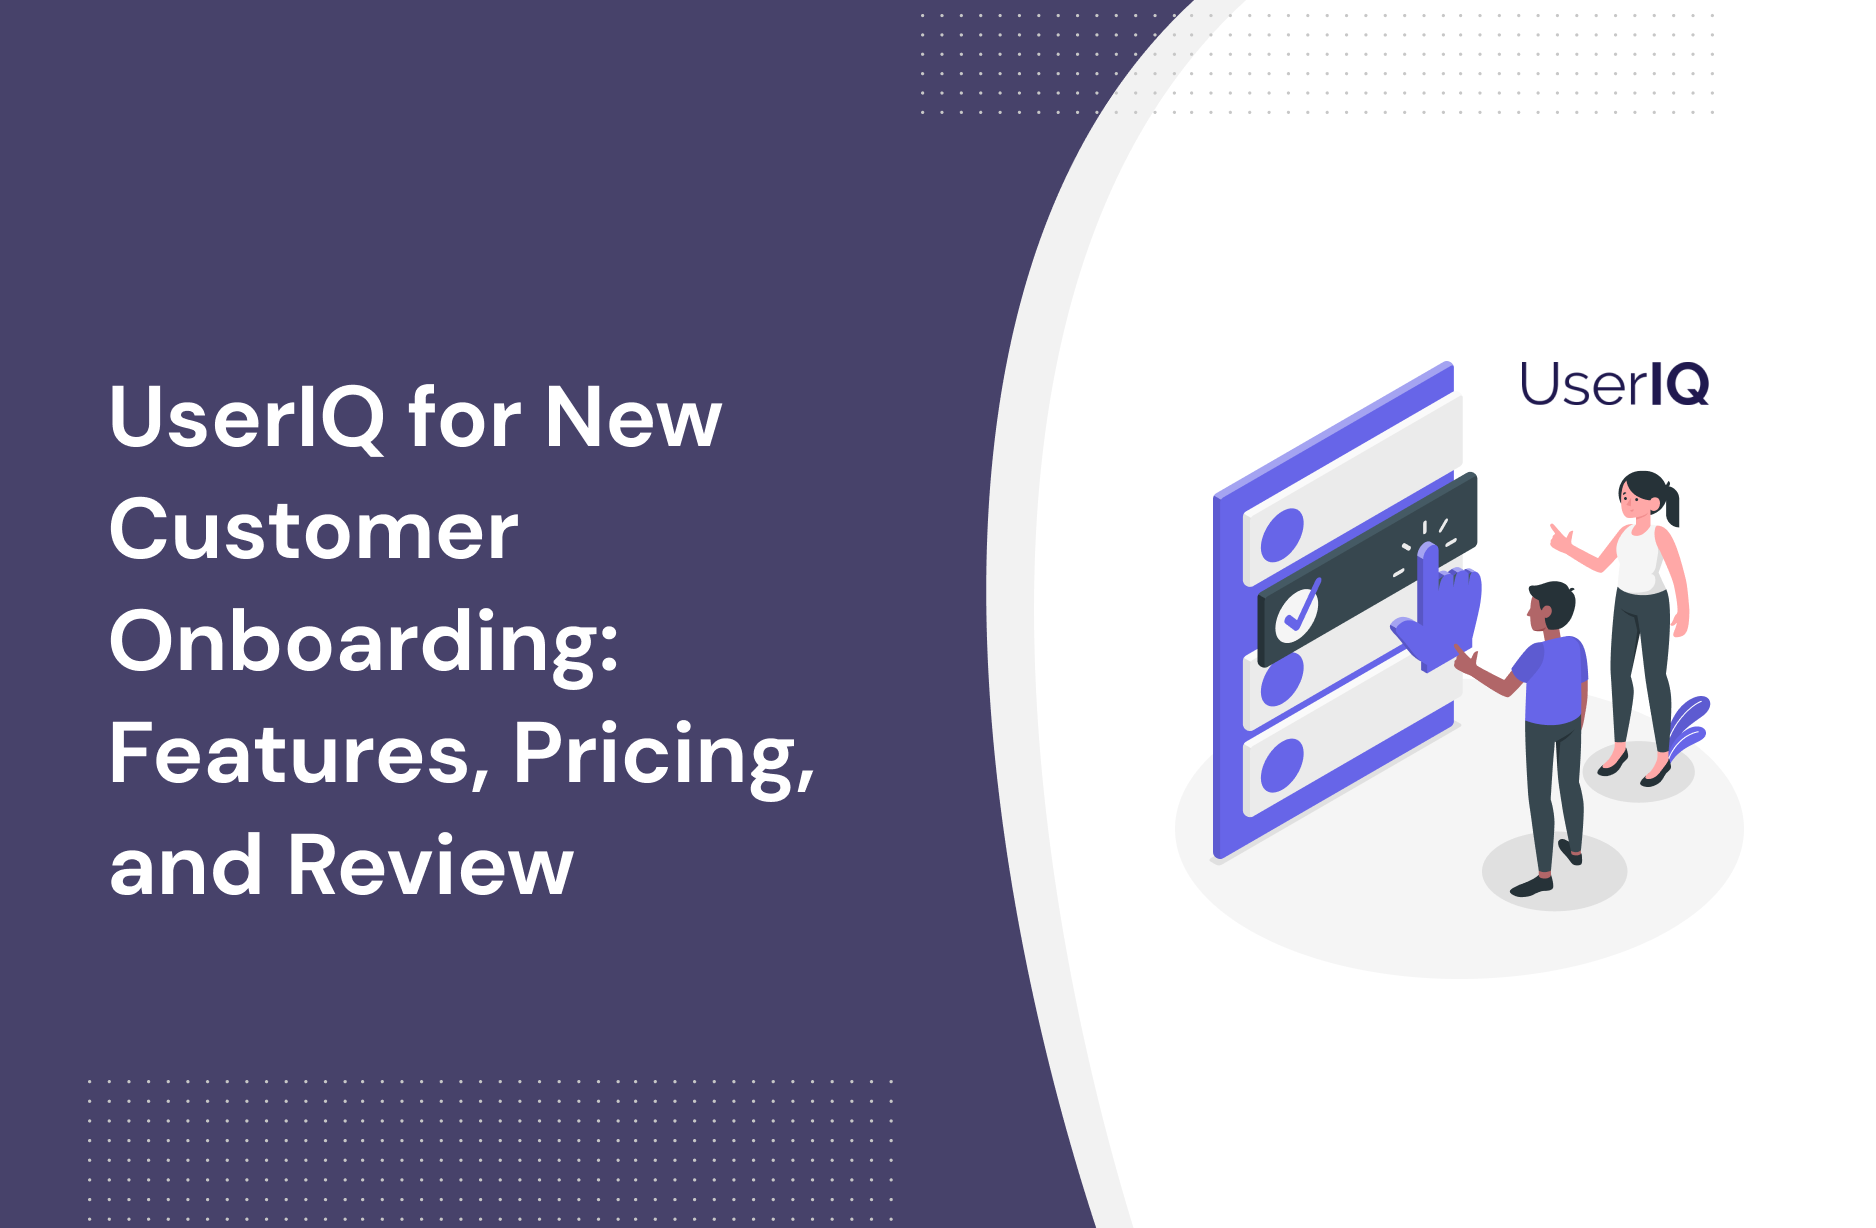 UserIQ for New Customer Onboarding: Features, Pricing, and Review